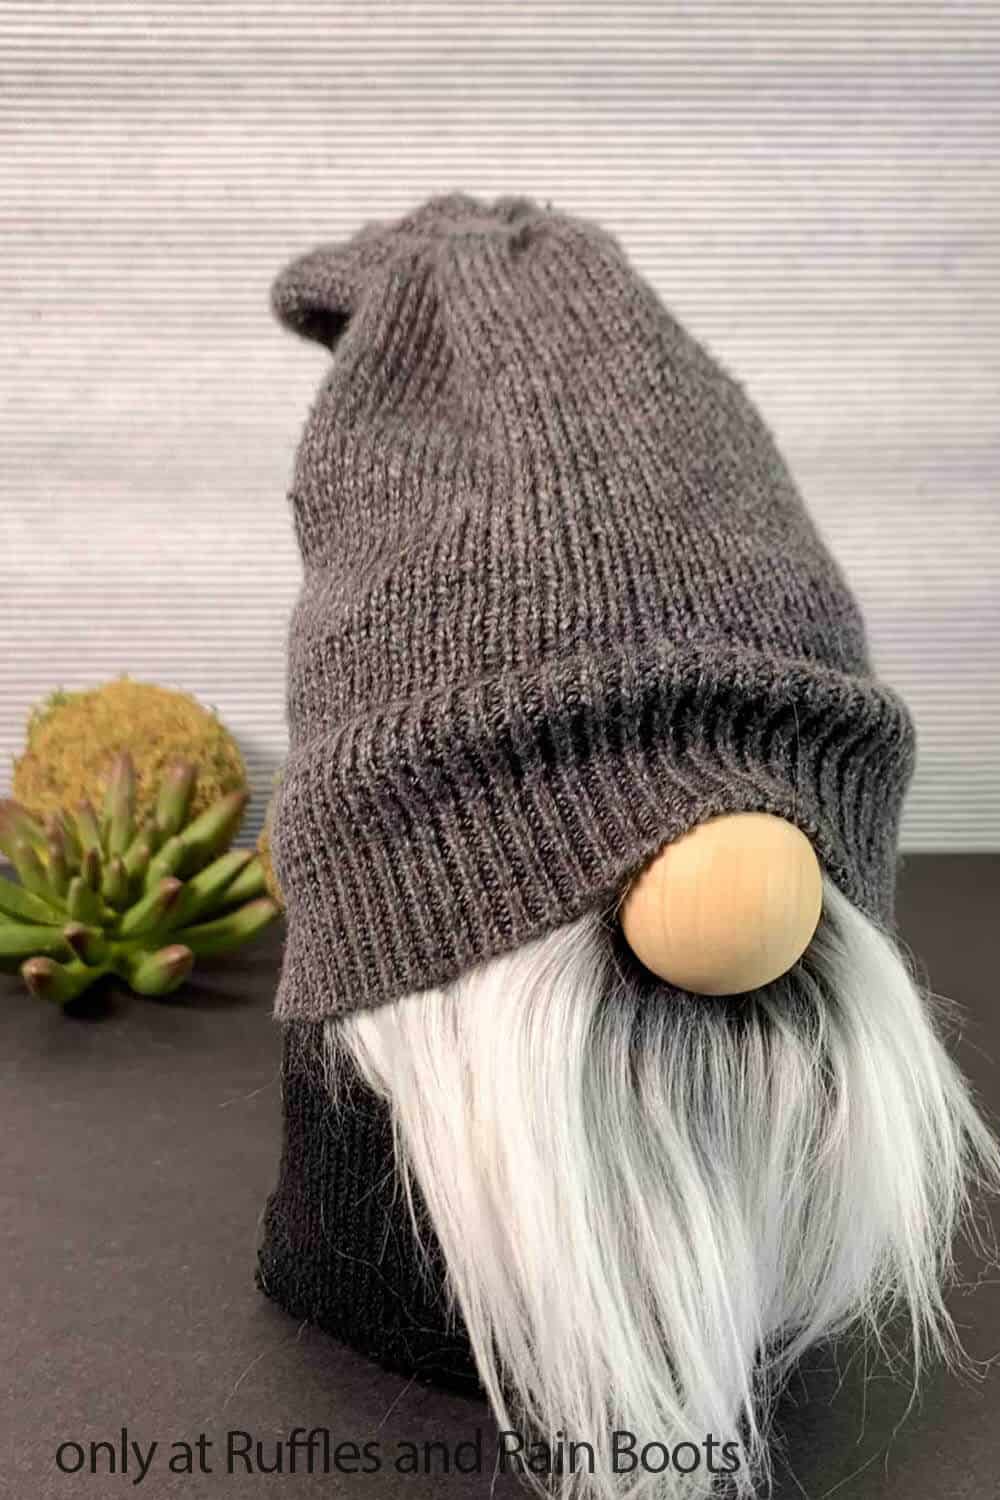 stable bodied gnome with a sweater hat